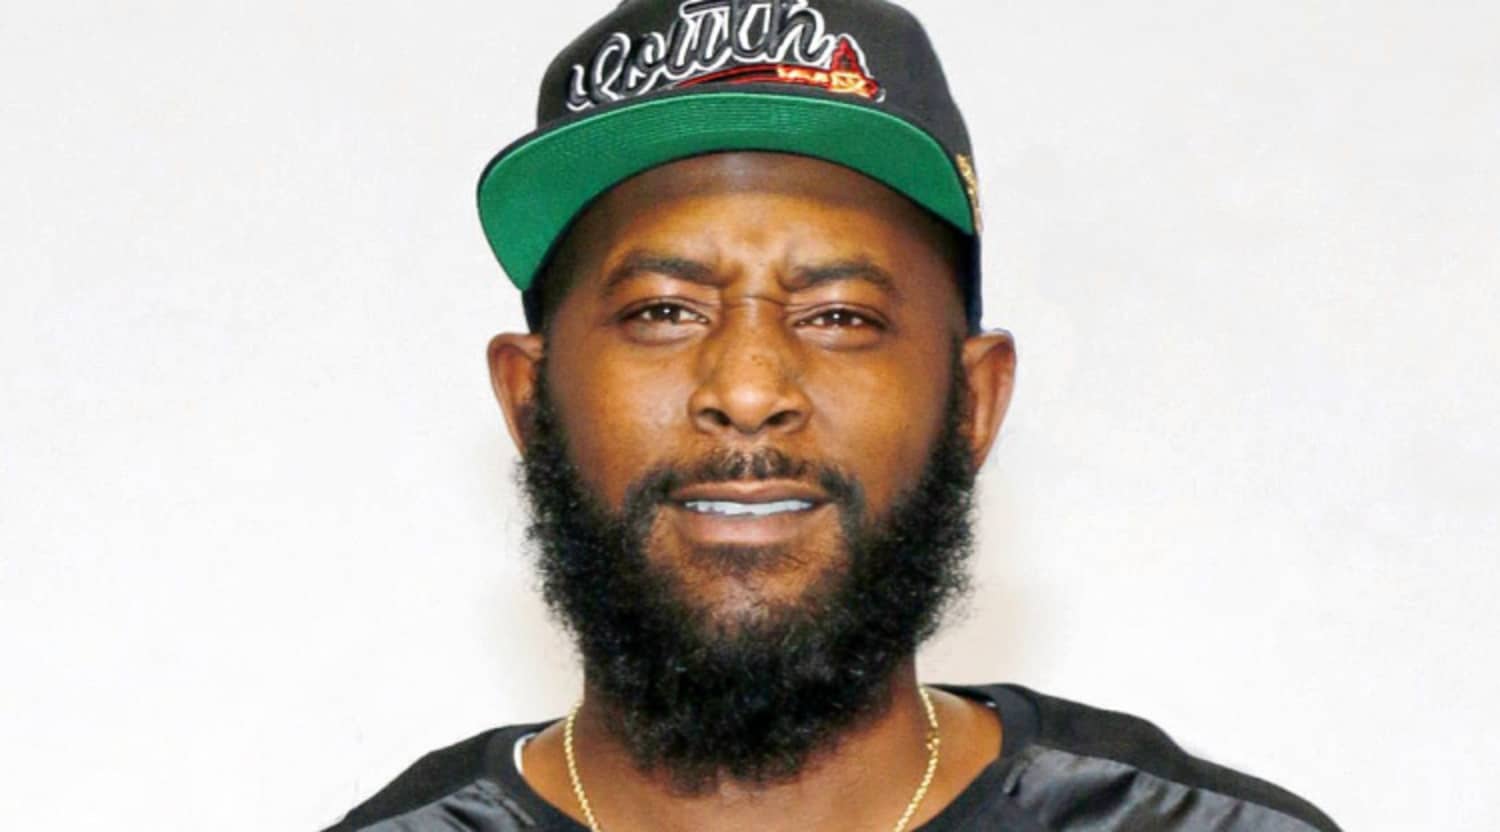 The 38-year old son of father (?) and mother(?) Karlous Miller in 2022 photo. Karlous Miller earned a  million dollar salary - leaving the net worth at  million in 2022